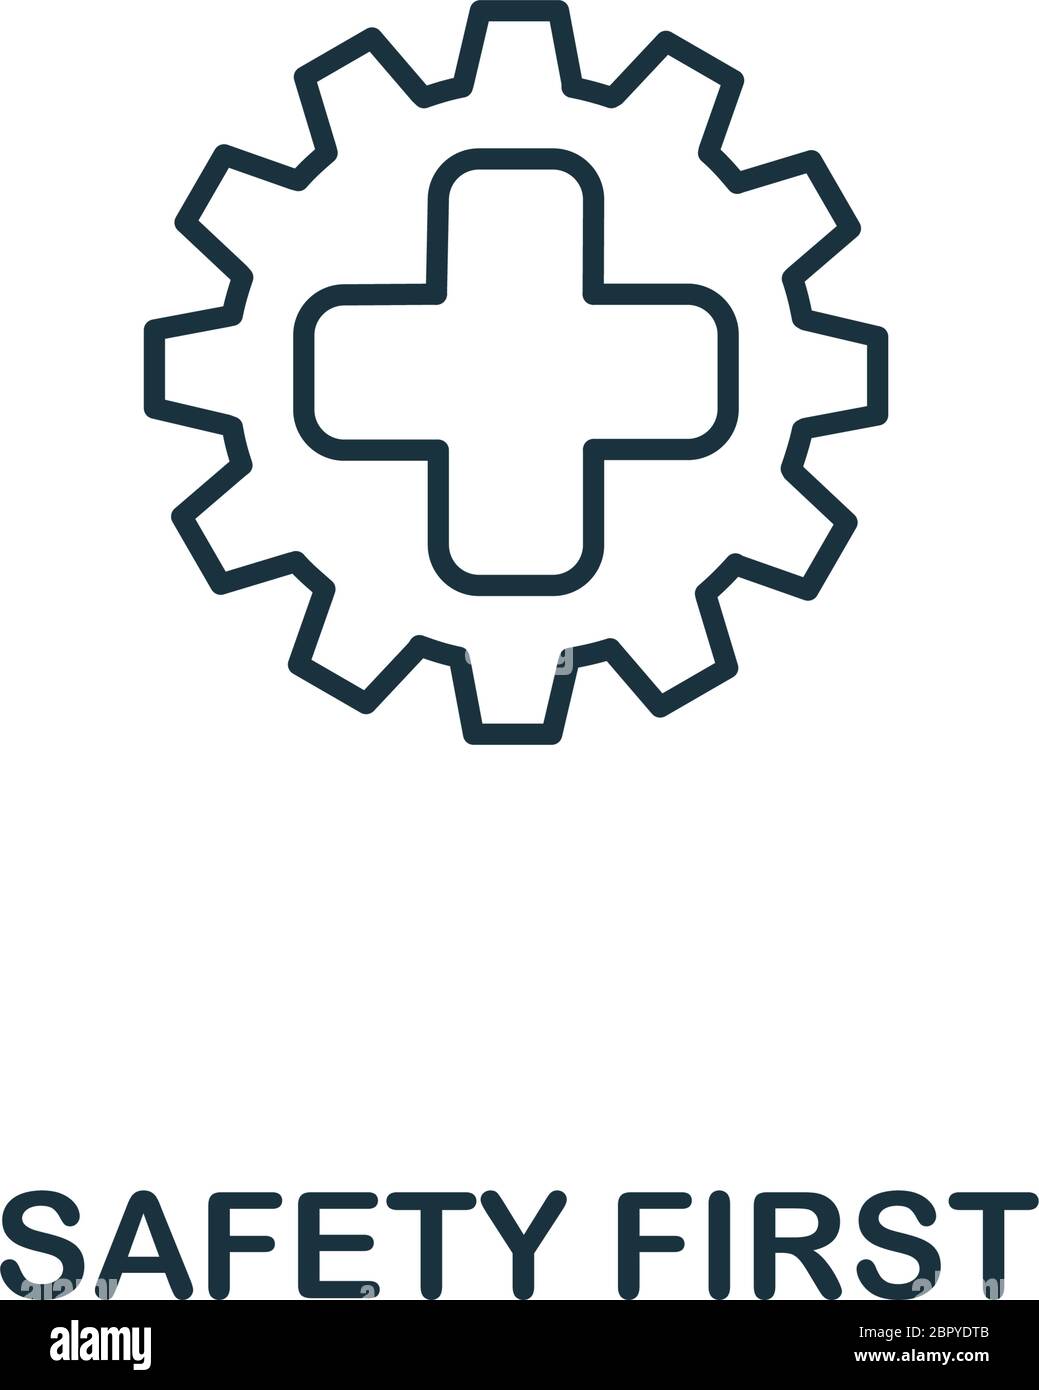 safety first logo image